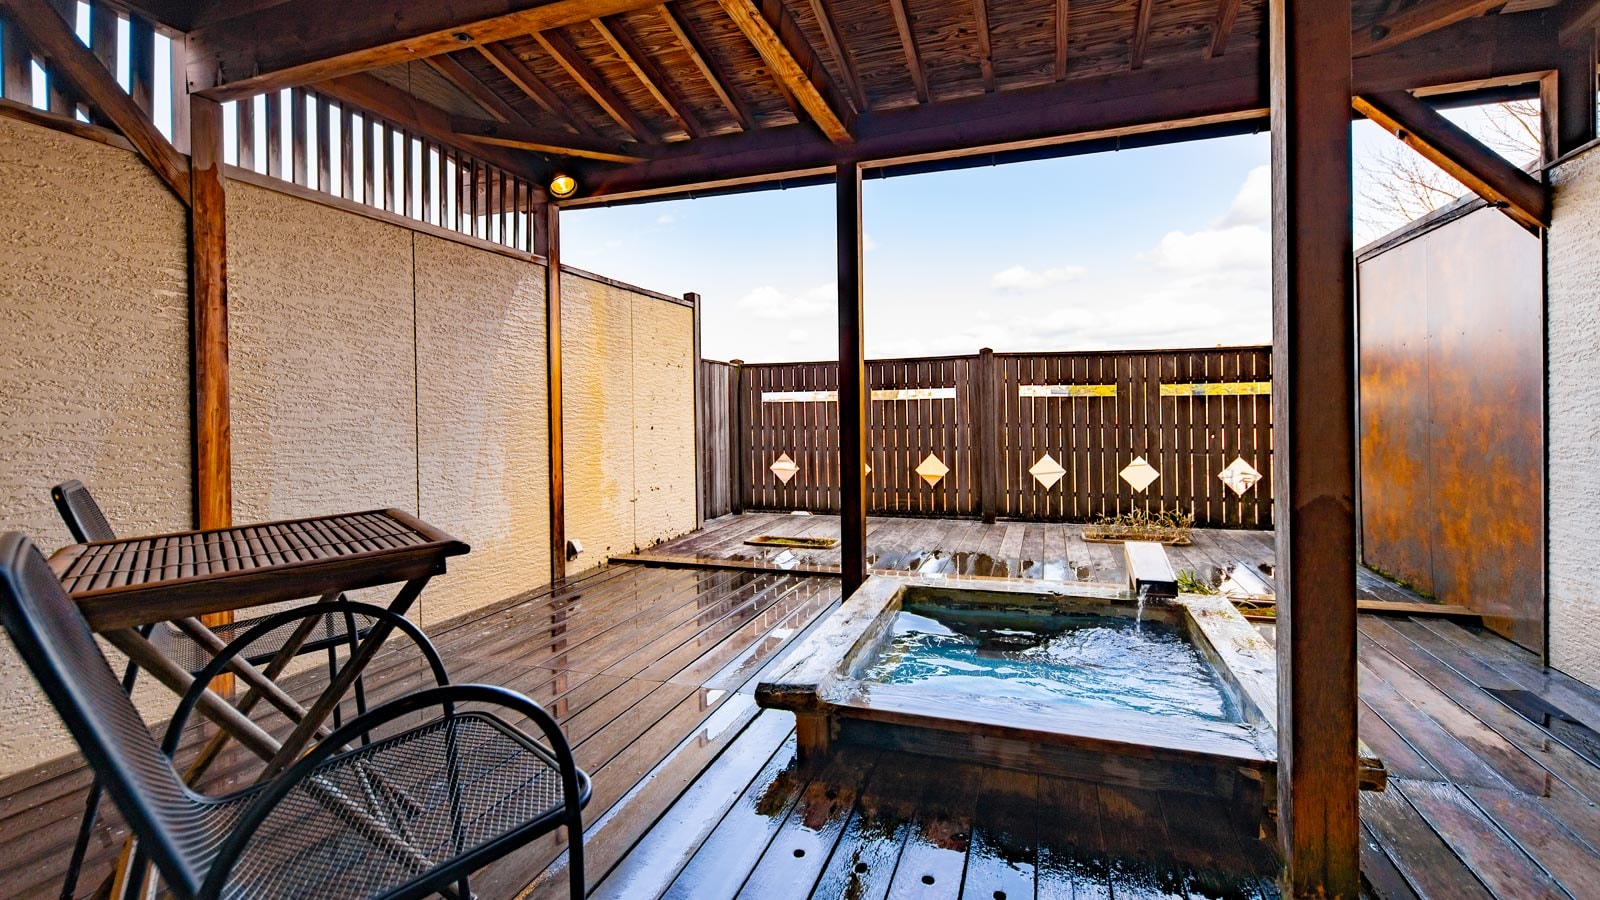 1R limited guest room with open-air bath "Fuya" Japanese-style room for 2 people, recommended for couples and couples.